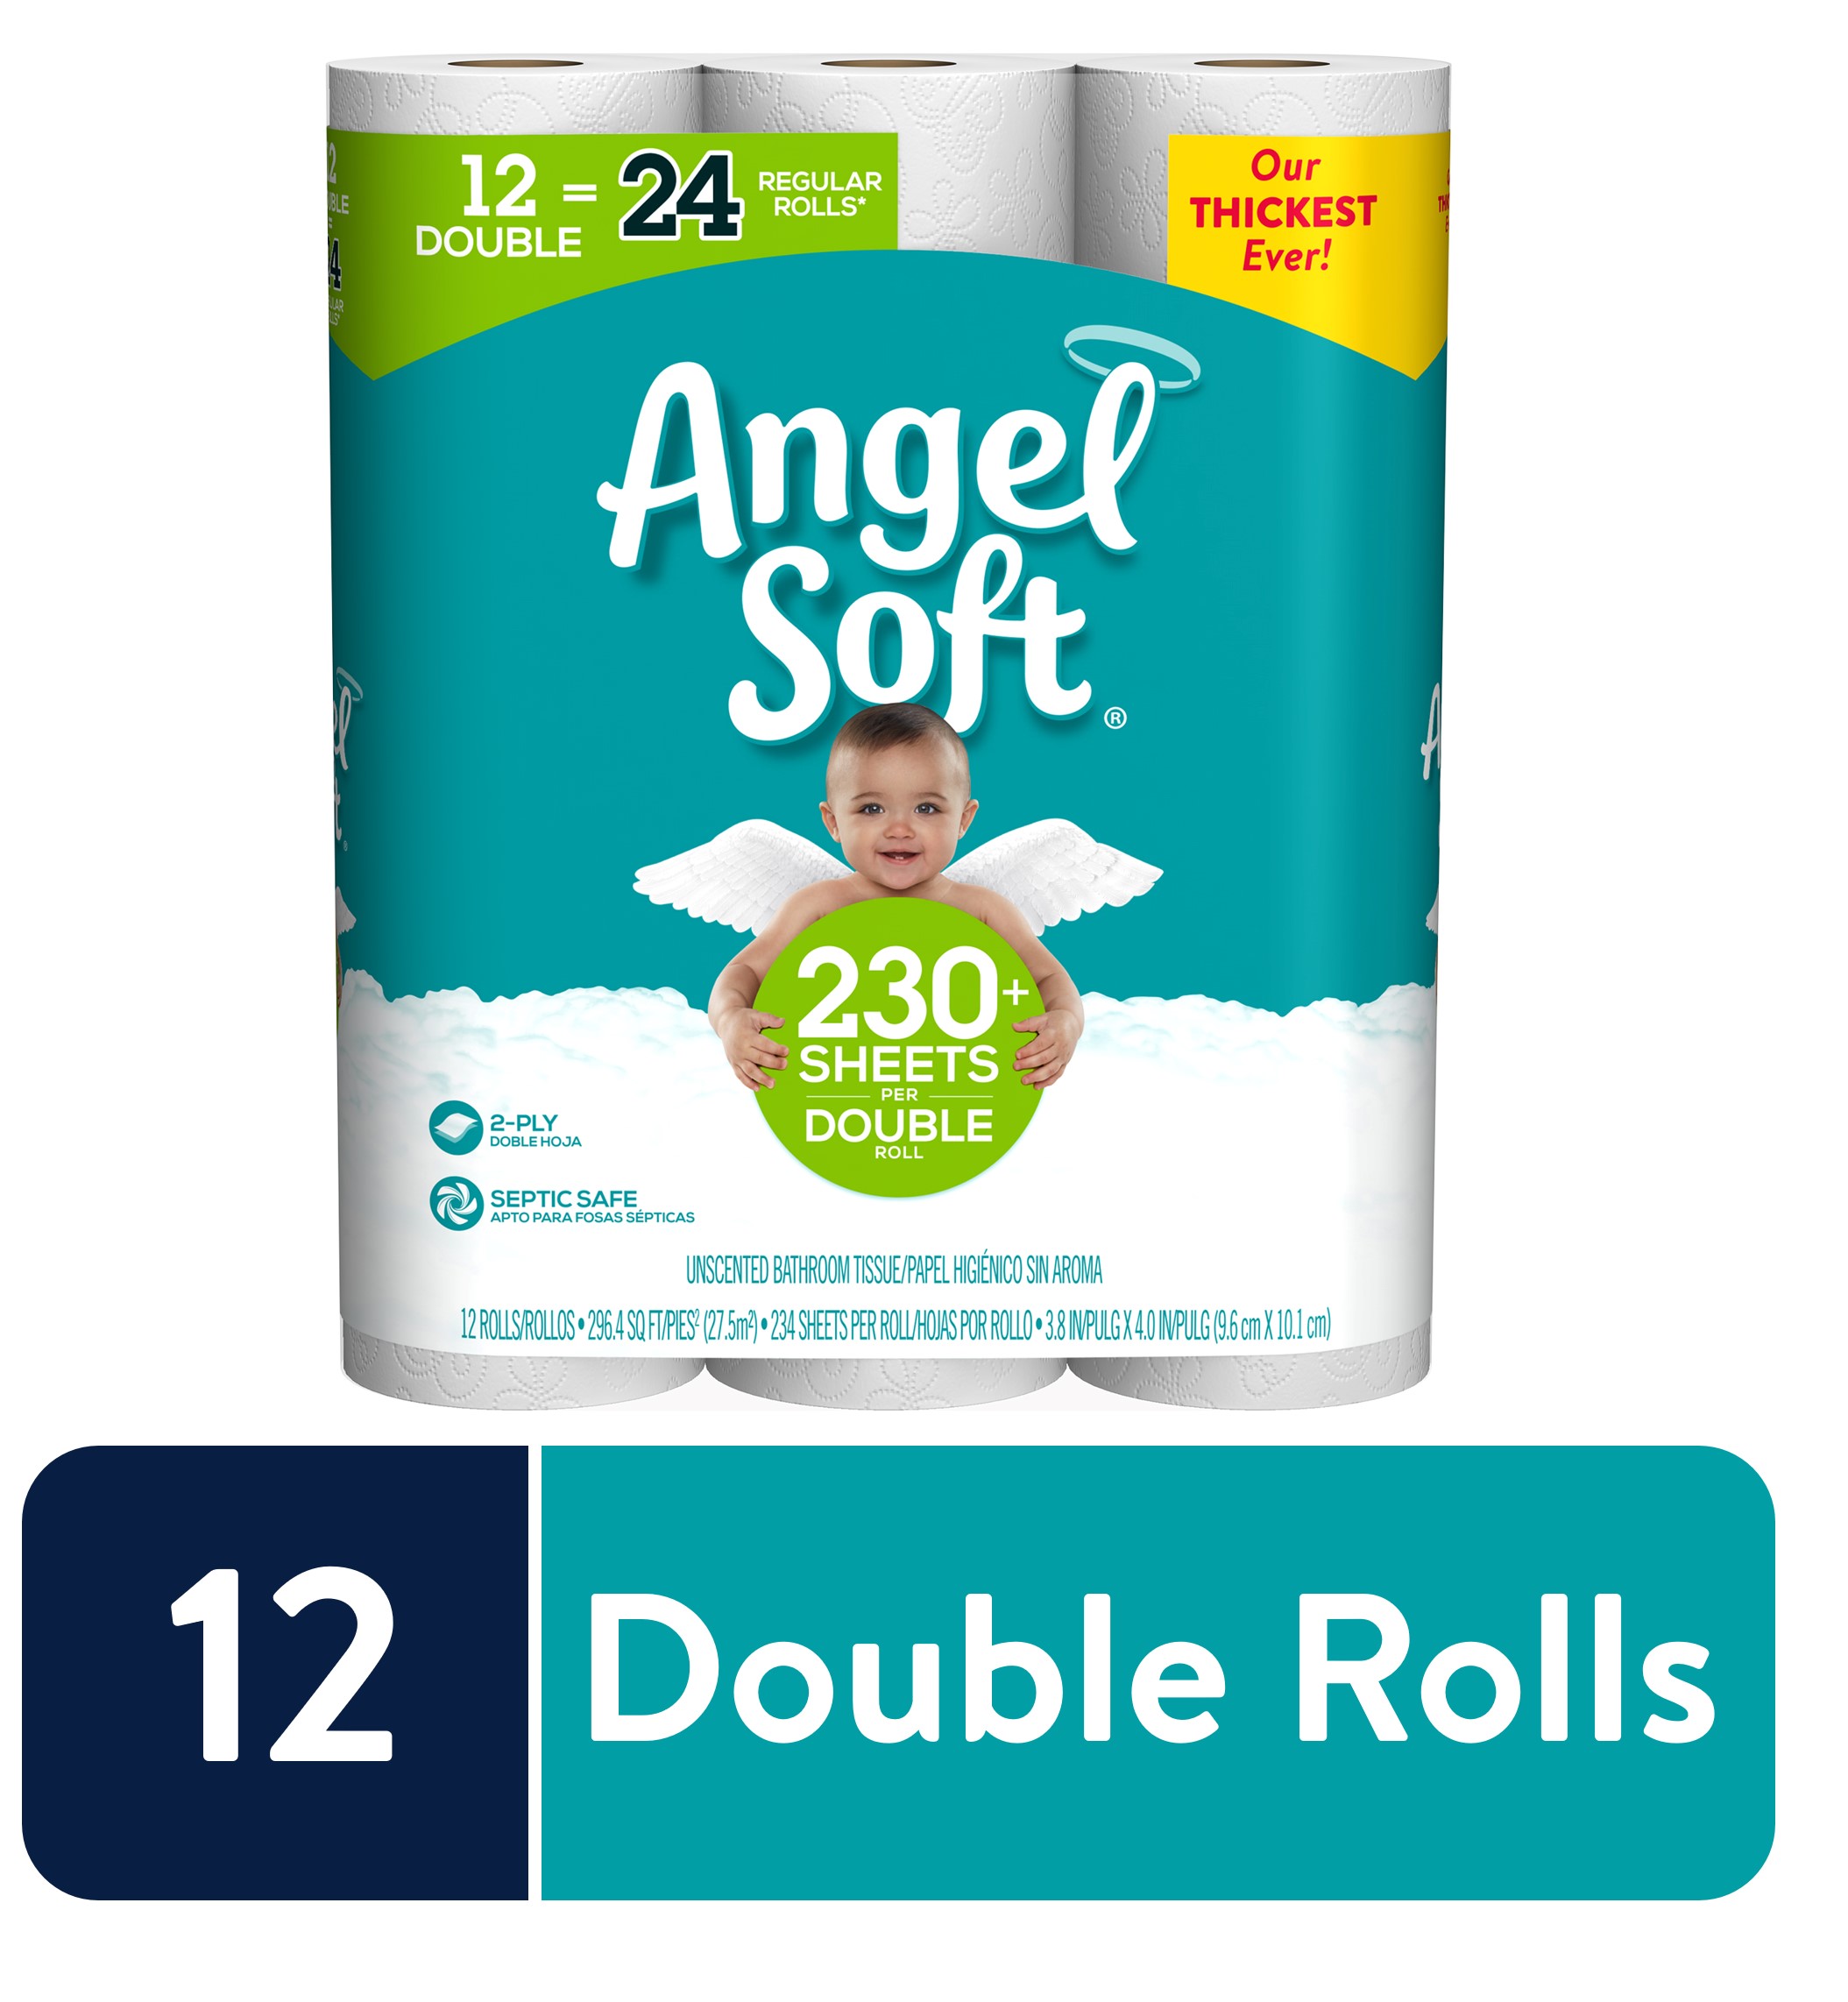 Angel Soft Toilet Paper, 12 Double Rolls - image 1 of 9